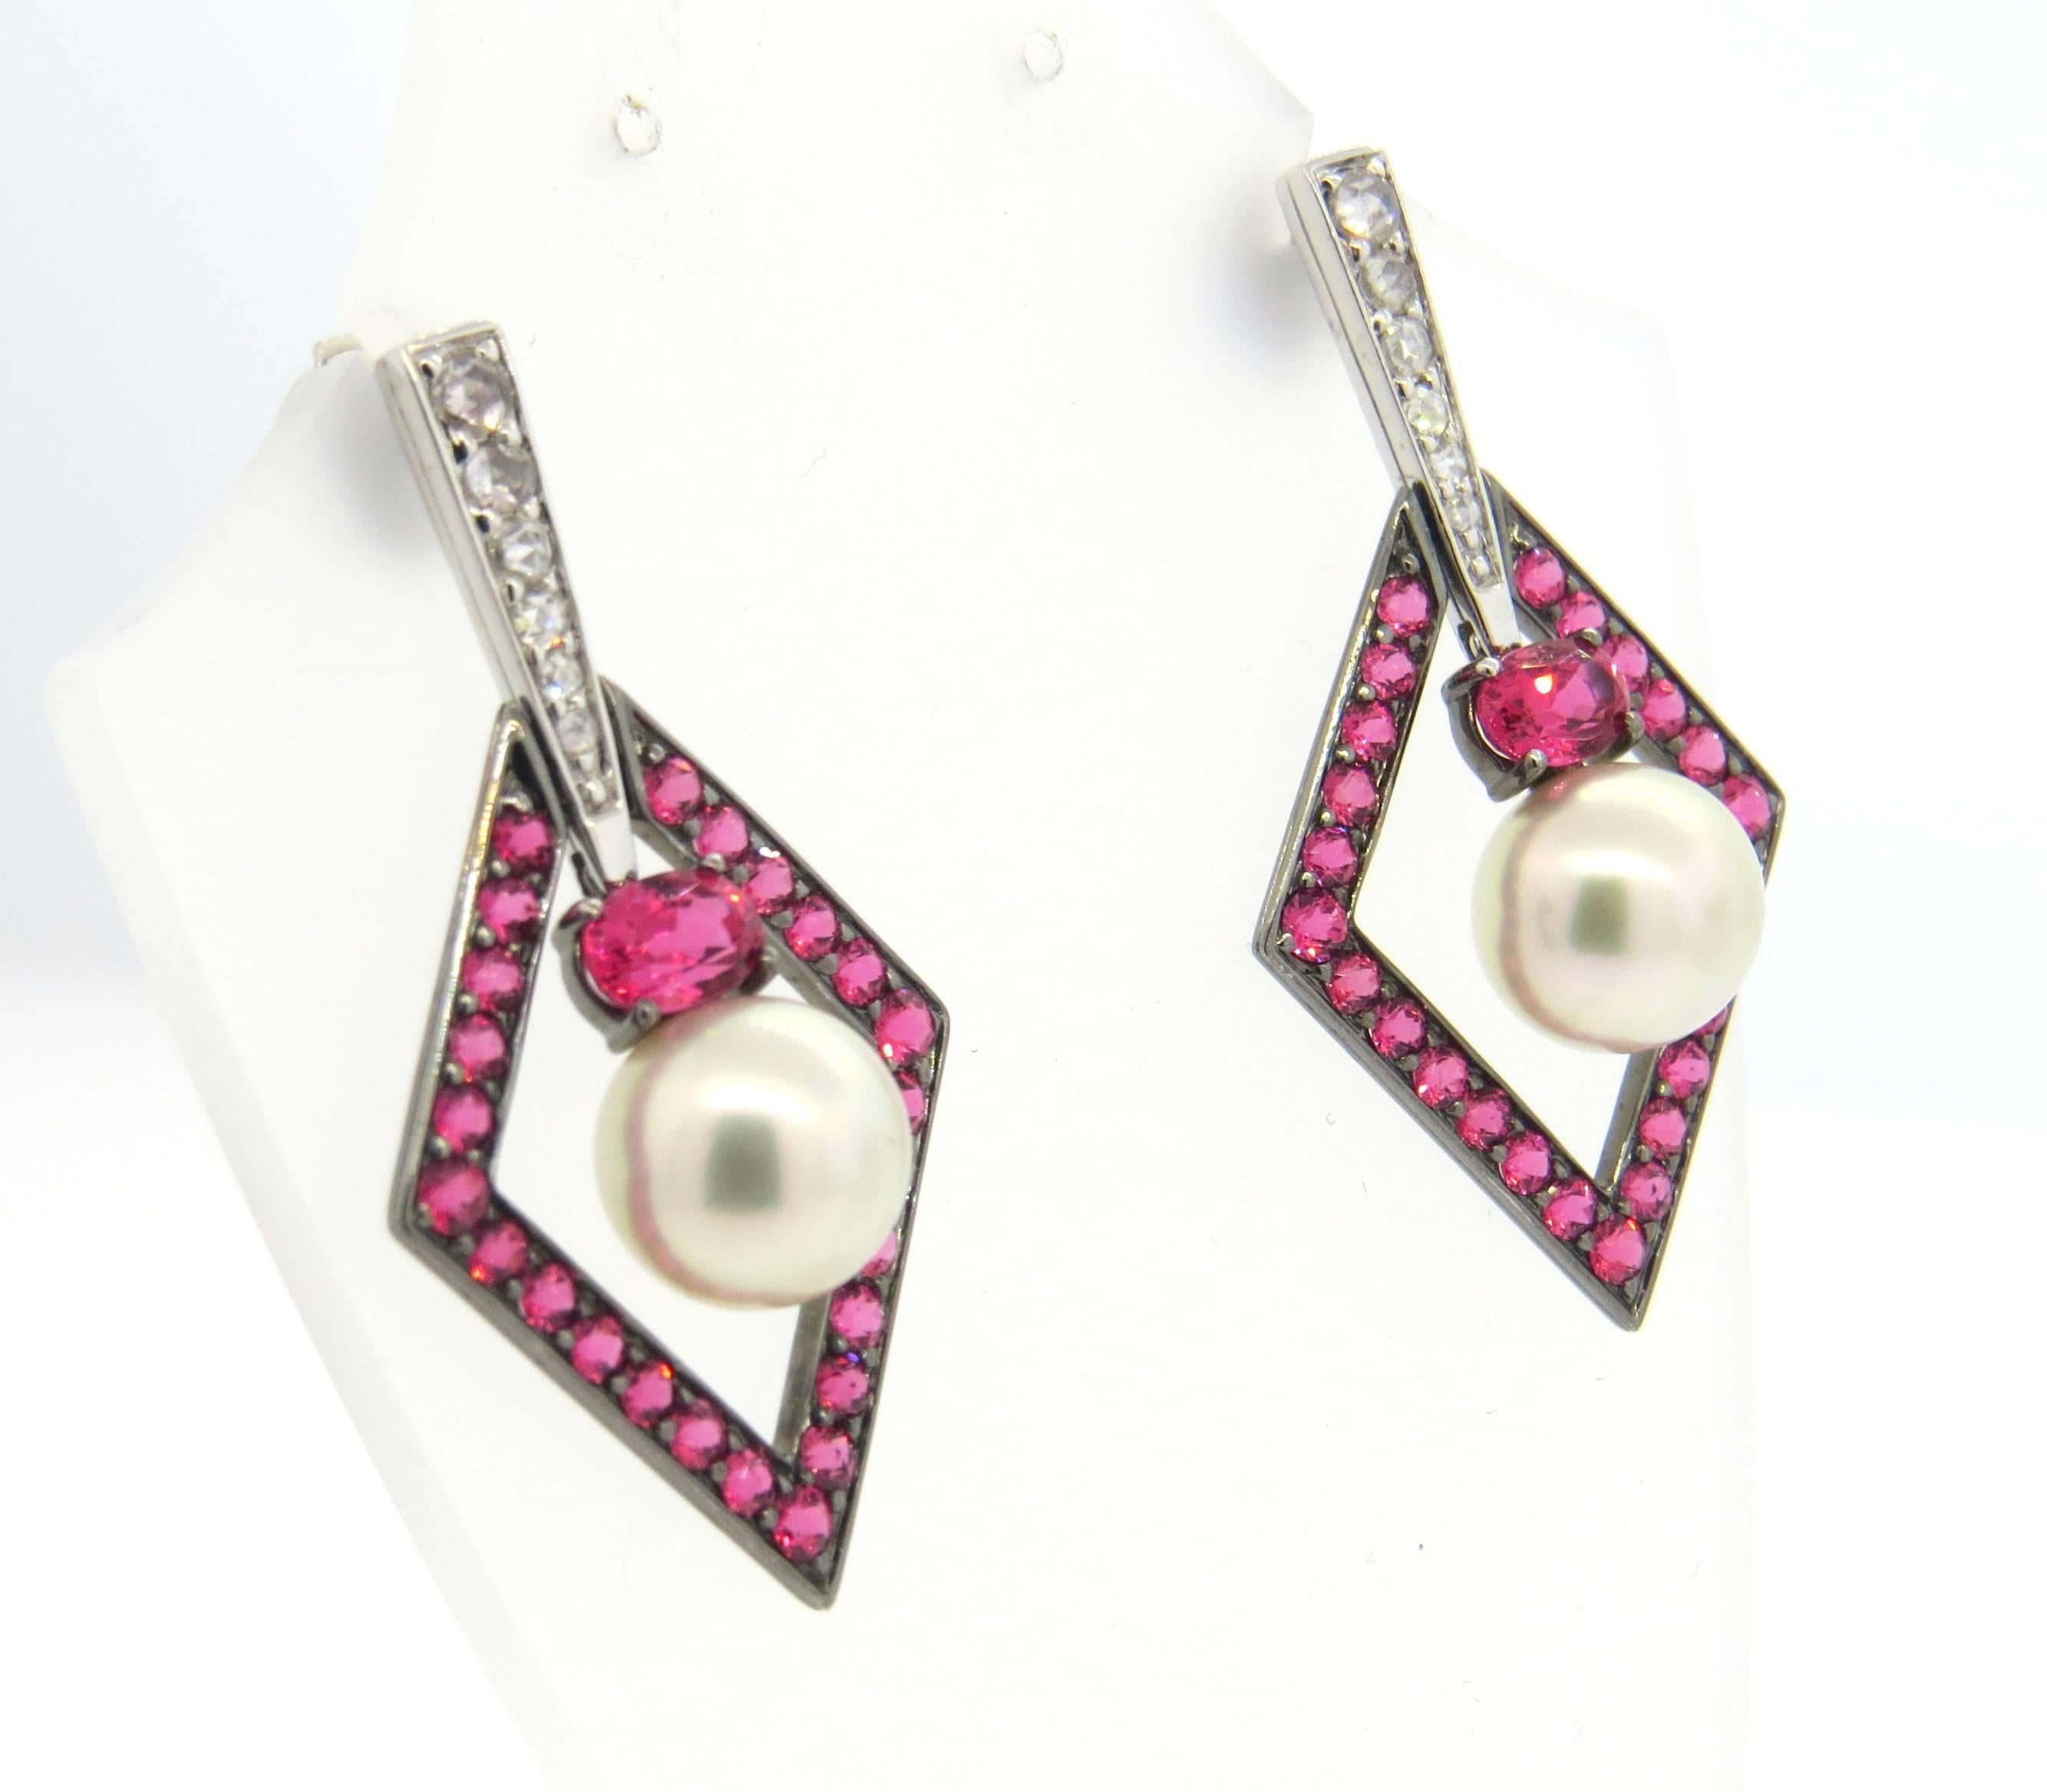 18k white gold long earrings, crafted by John Hardy for Cinta collection, decorated with rose cut diamonds, 10.3mm pearls and pink spinel gemstones. Earrings are 44mm x 24mm. Marked 18k JH. Weight - 14.7 grams